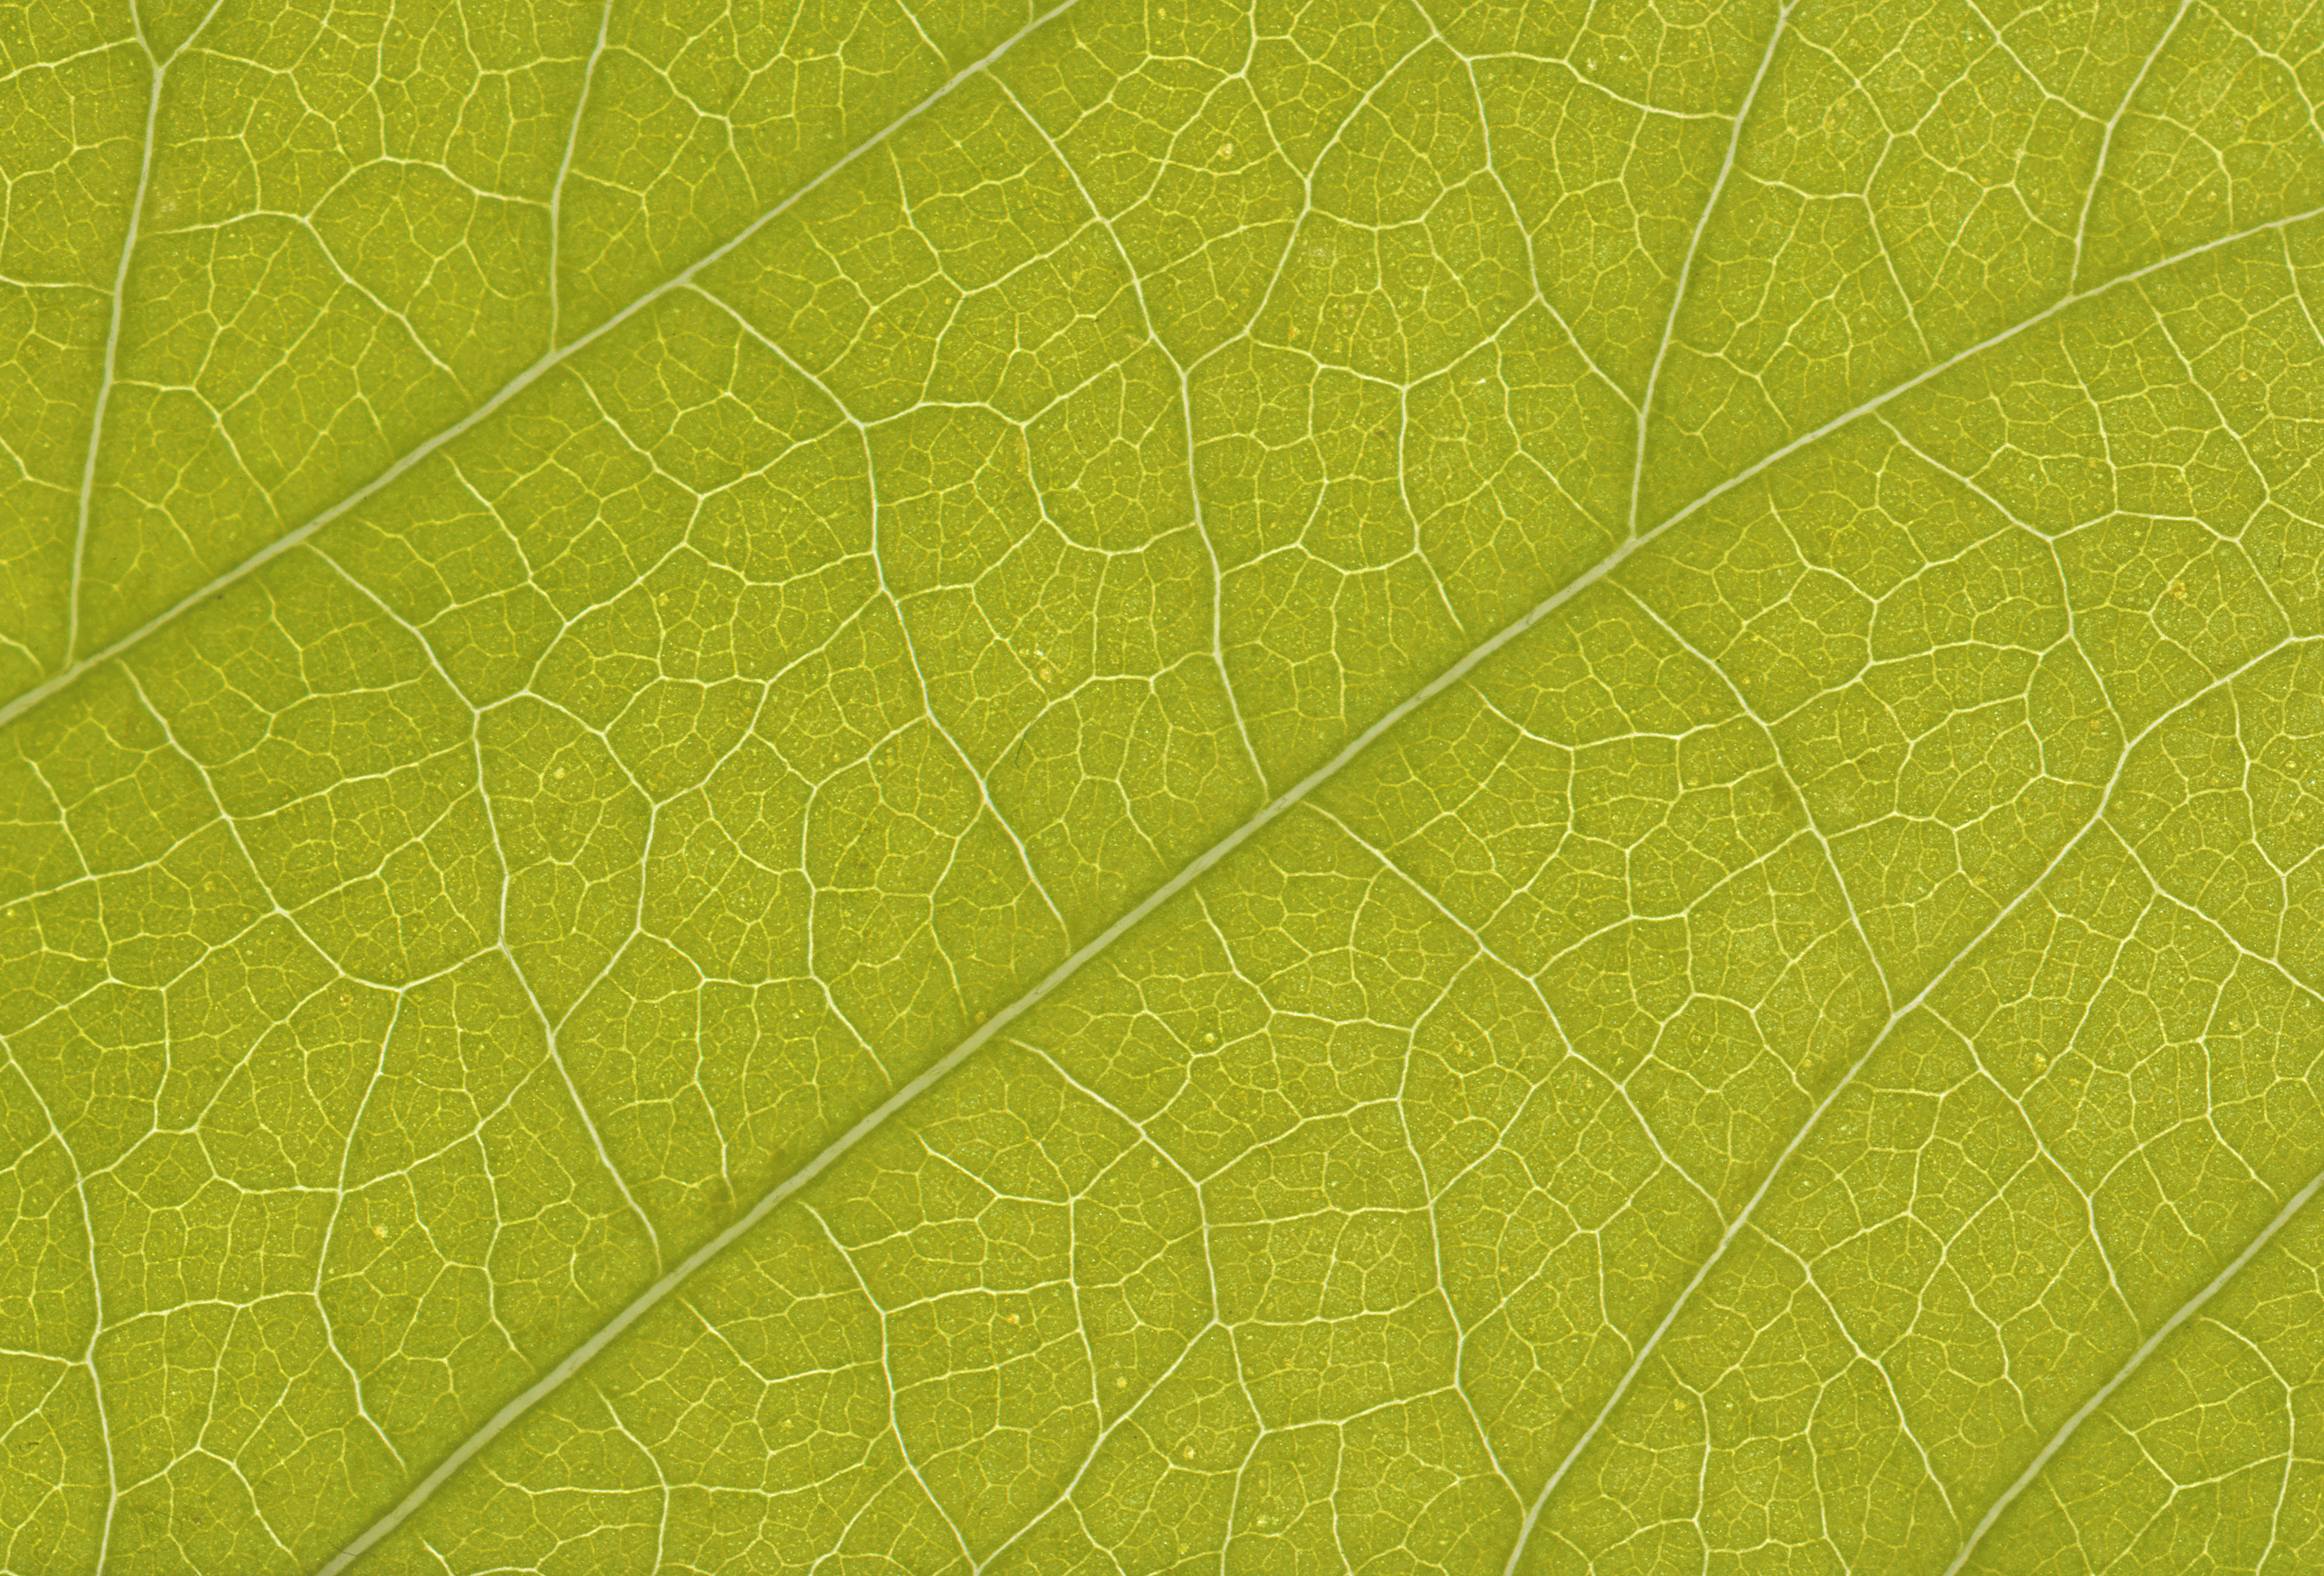 Free stock leaf textures, cg textures, free download, leaf textures ...